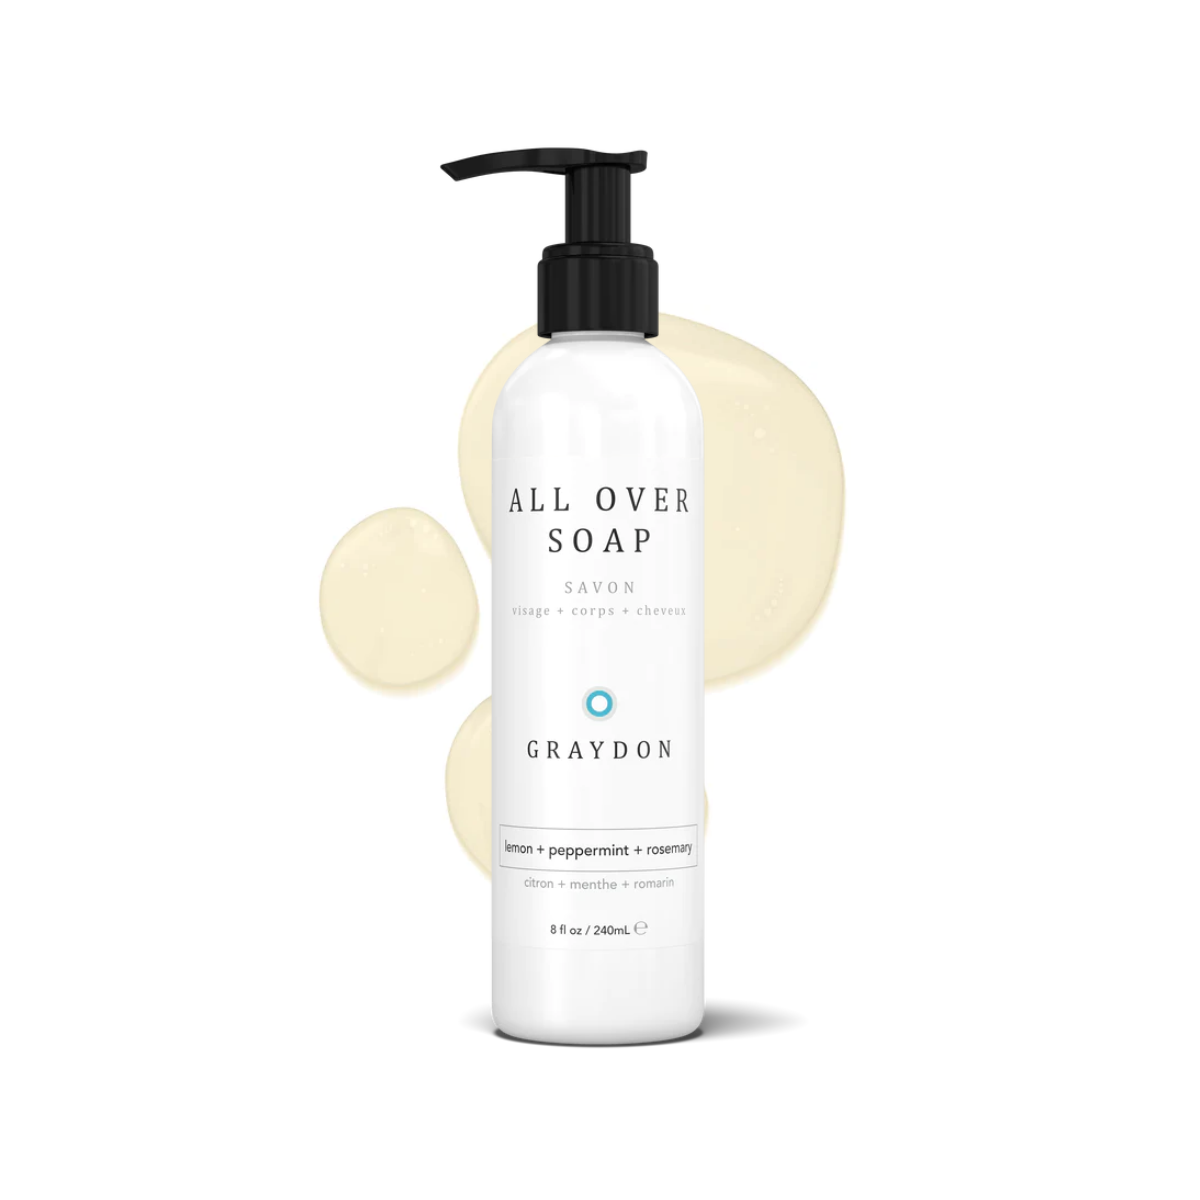 All Over Soap | body + face + hair